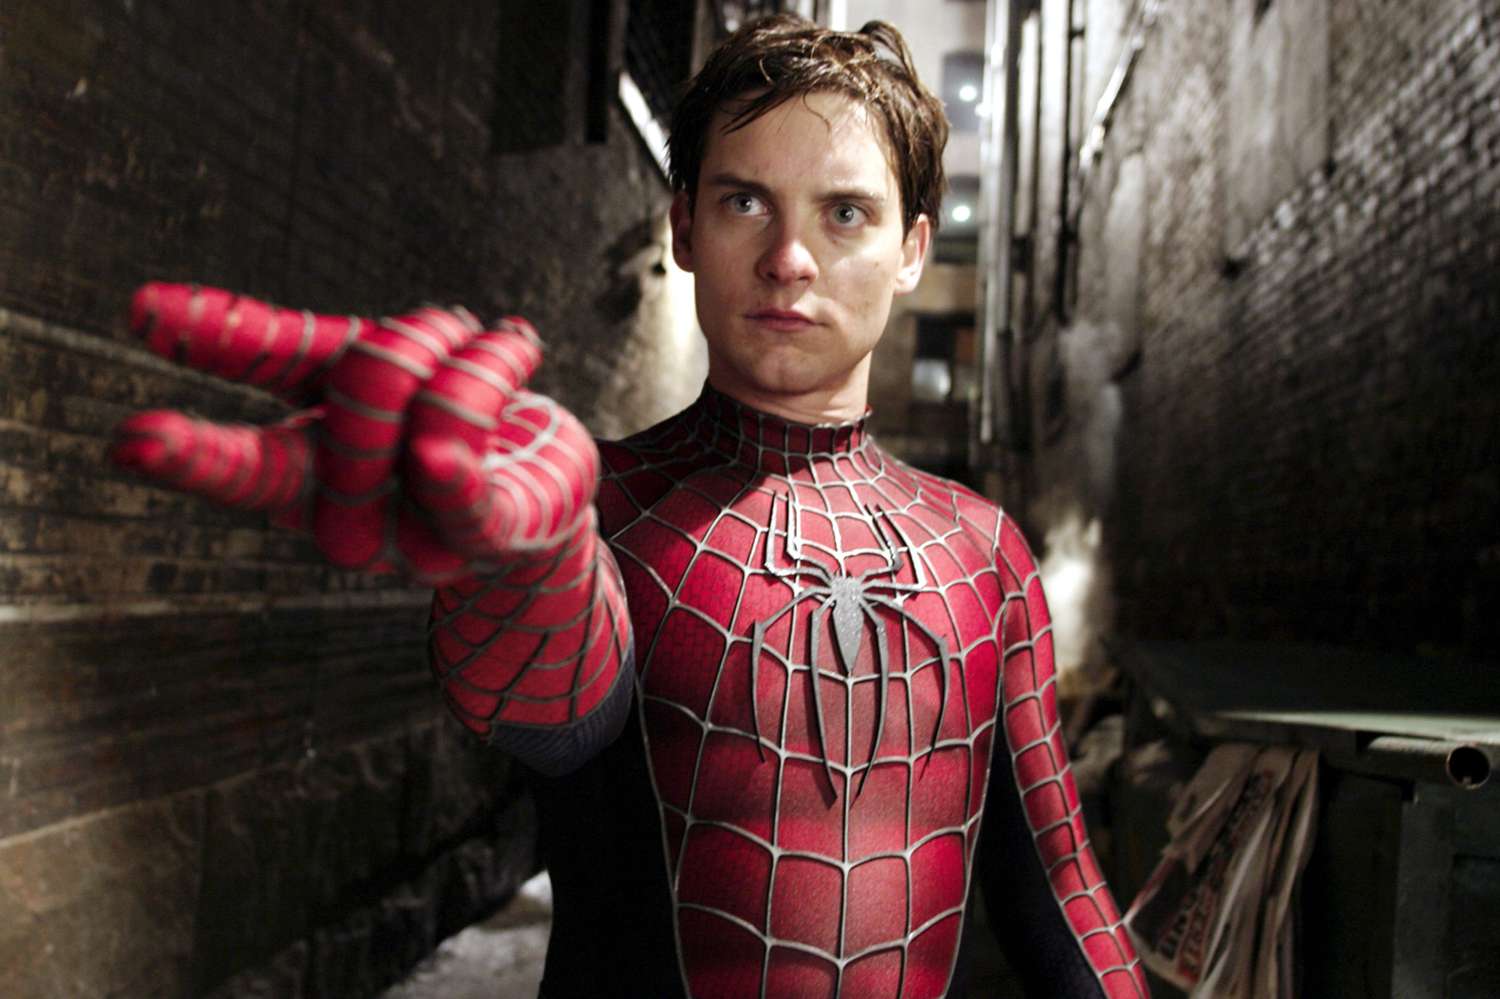 Tobey Maguire played Spider-Man in the Sam Raimi trilogy